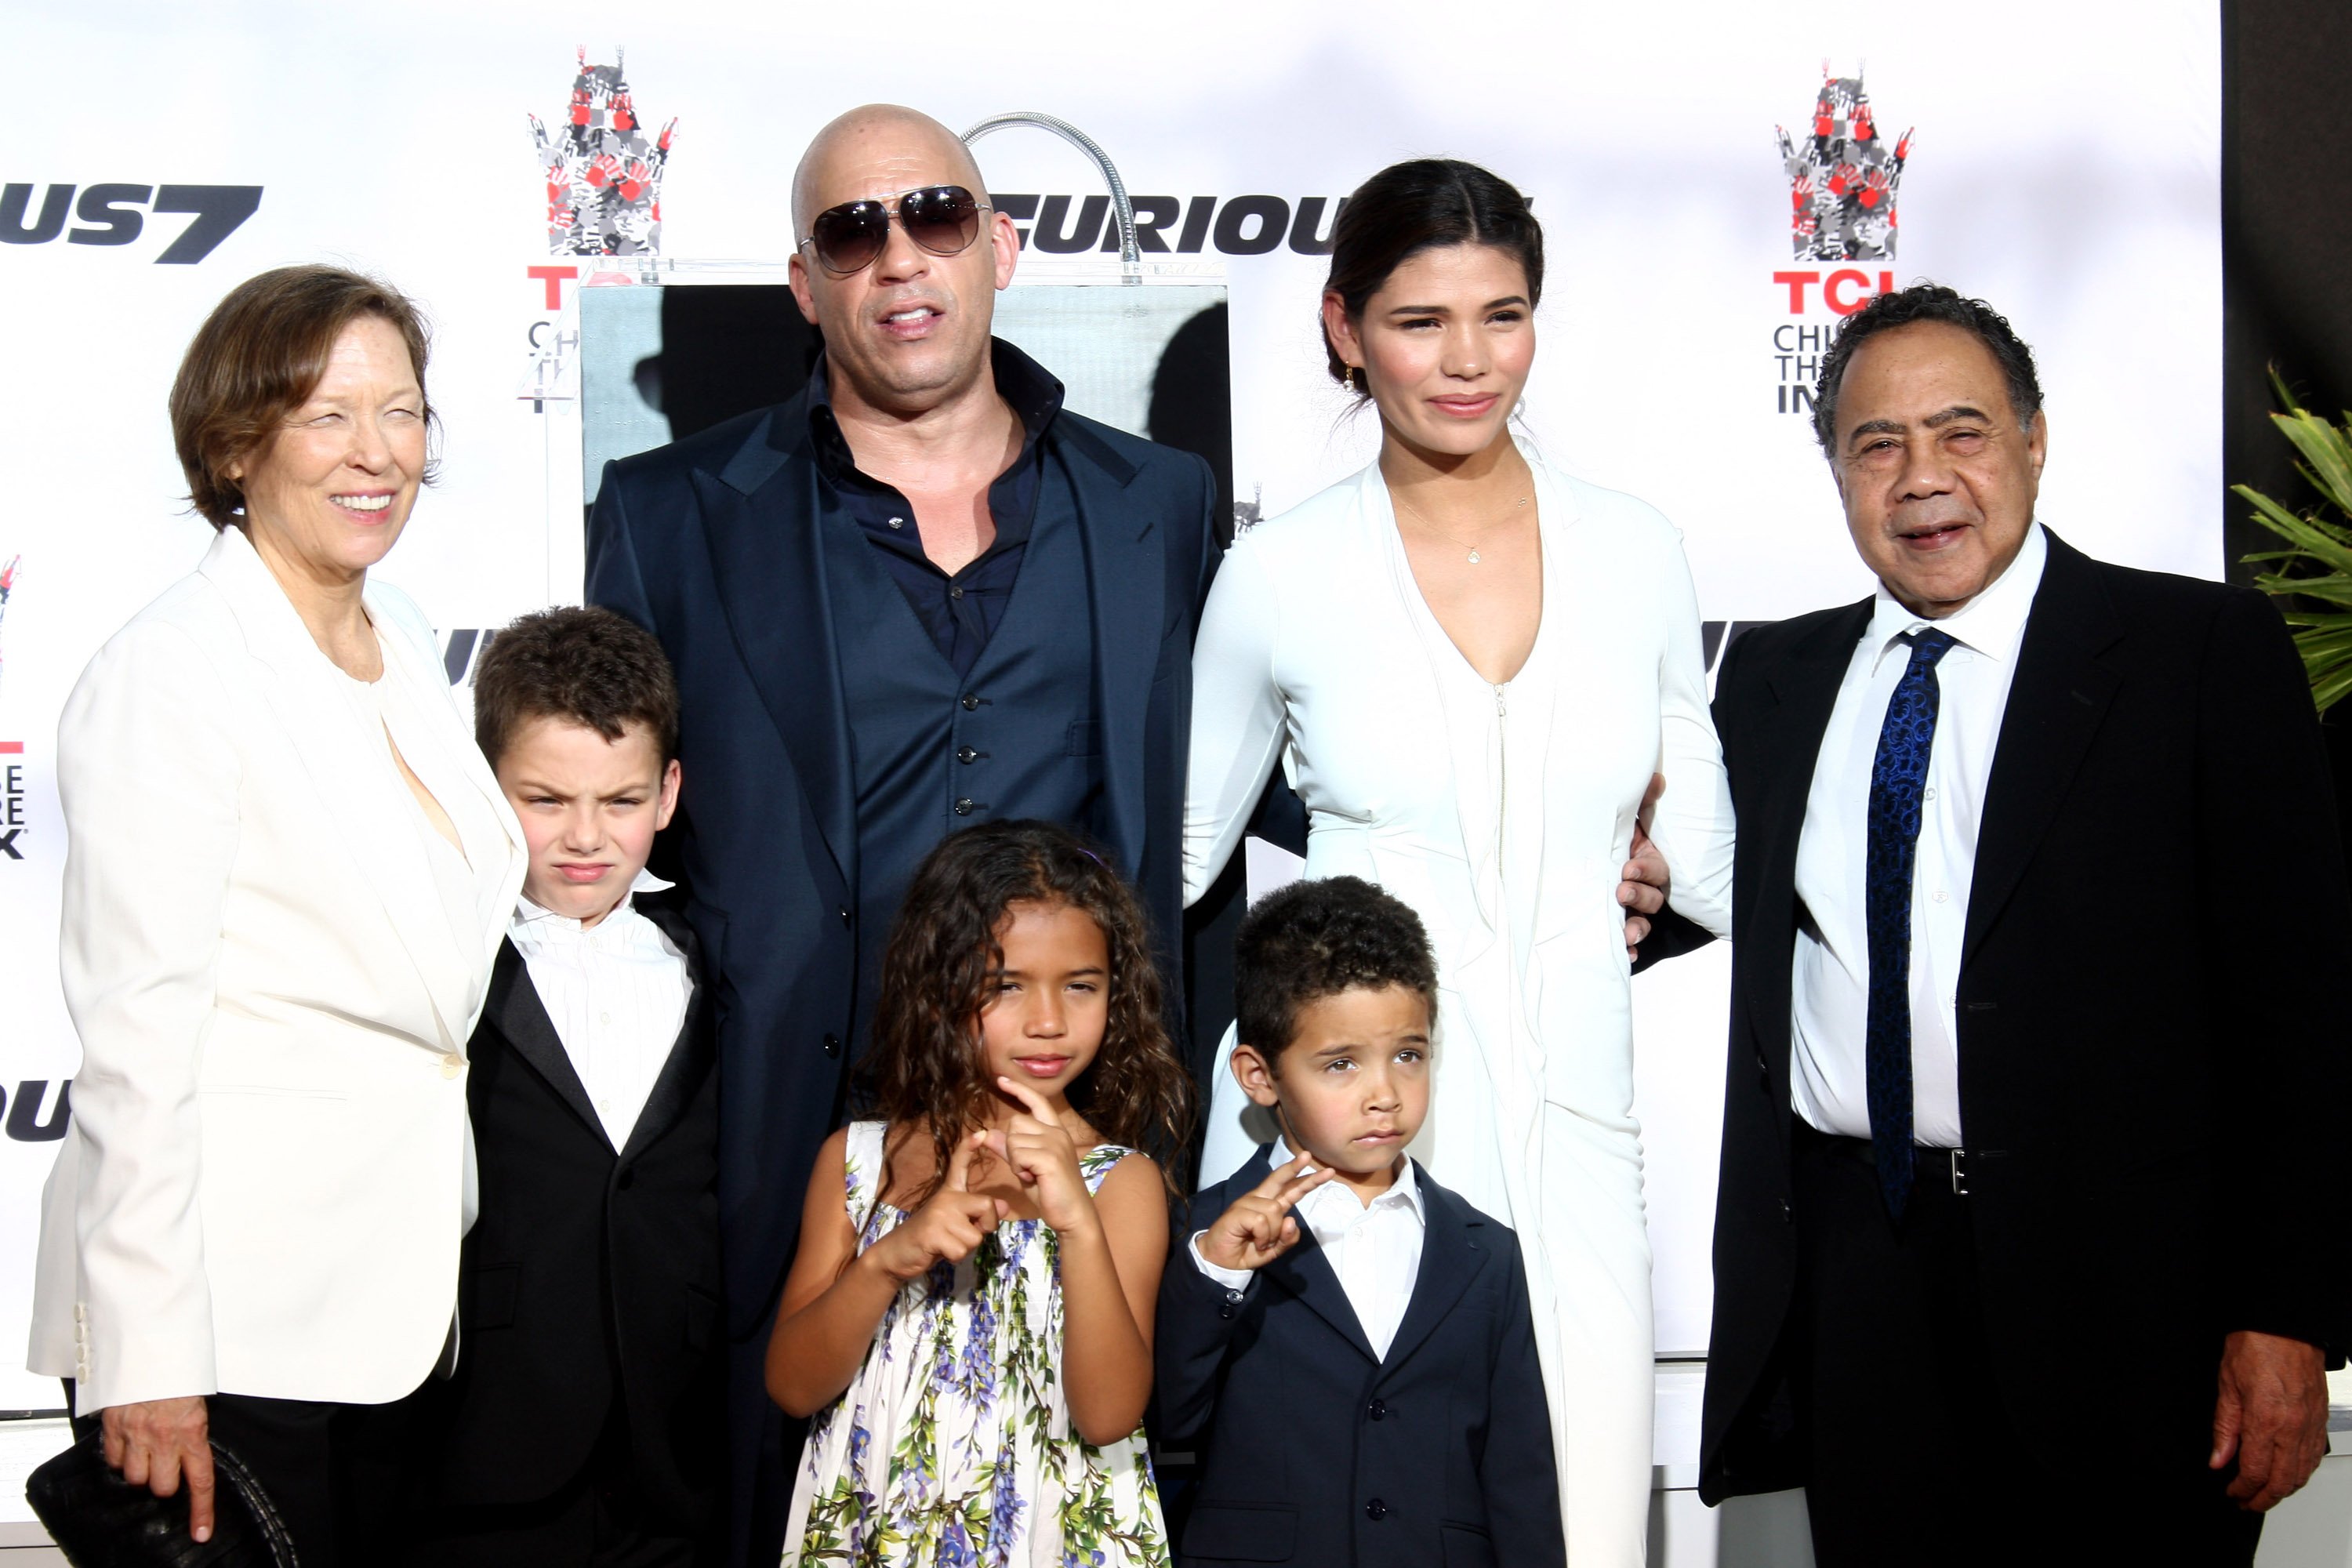 Vin Diesel and family at the TCL Chinese Theatre IMAX hand/footprint ceremony honoring Vin Diesel in 2015, in Hollywood, California. | Source: Getty Images